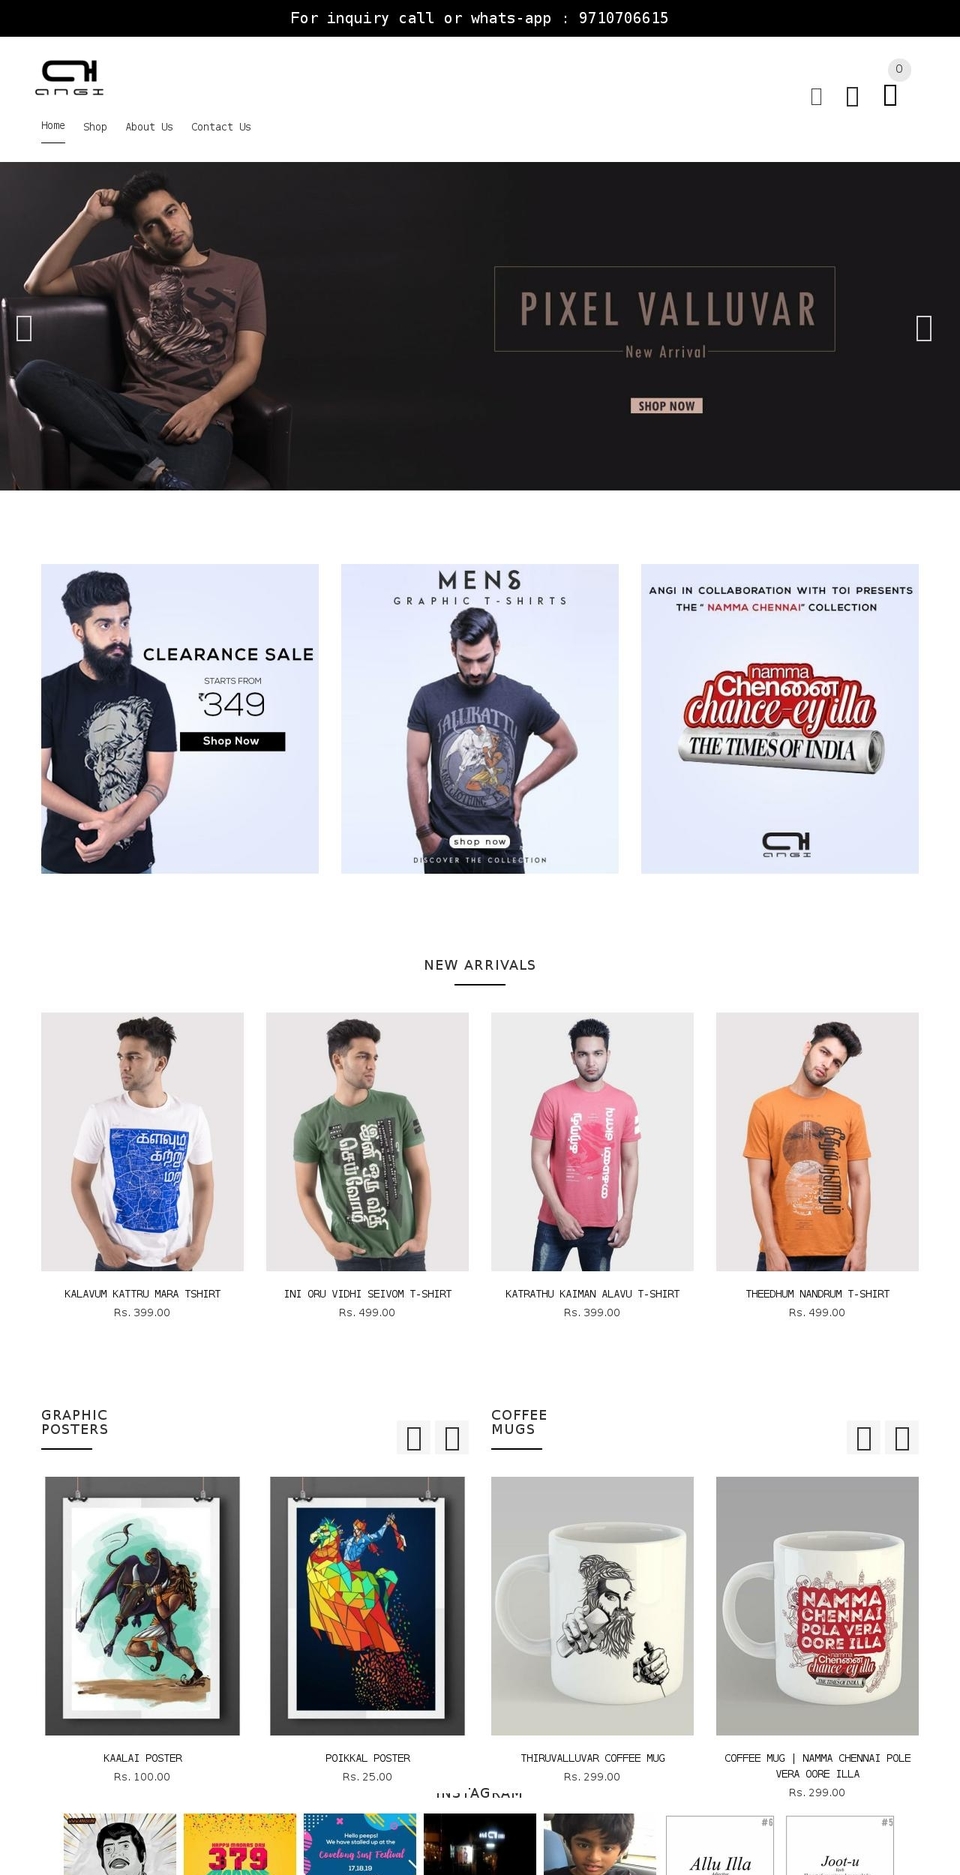 install-me-yourstore-v2-1-9 Shopify theme site example angi.in